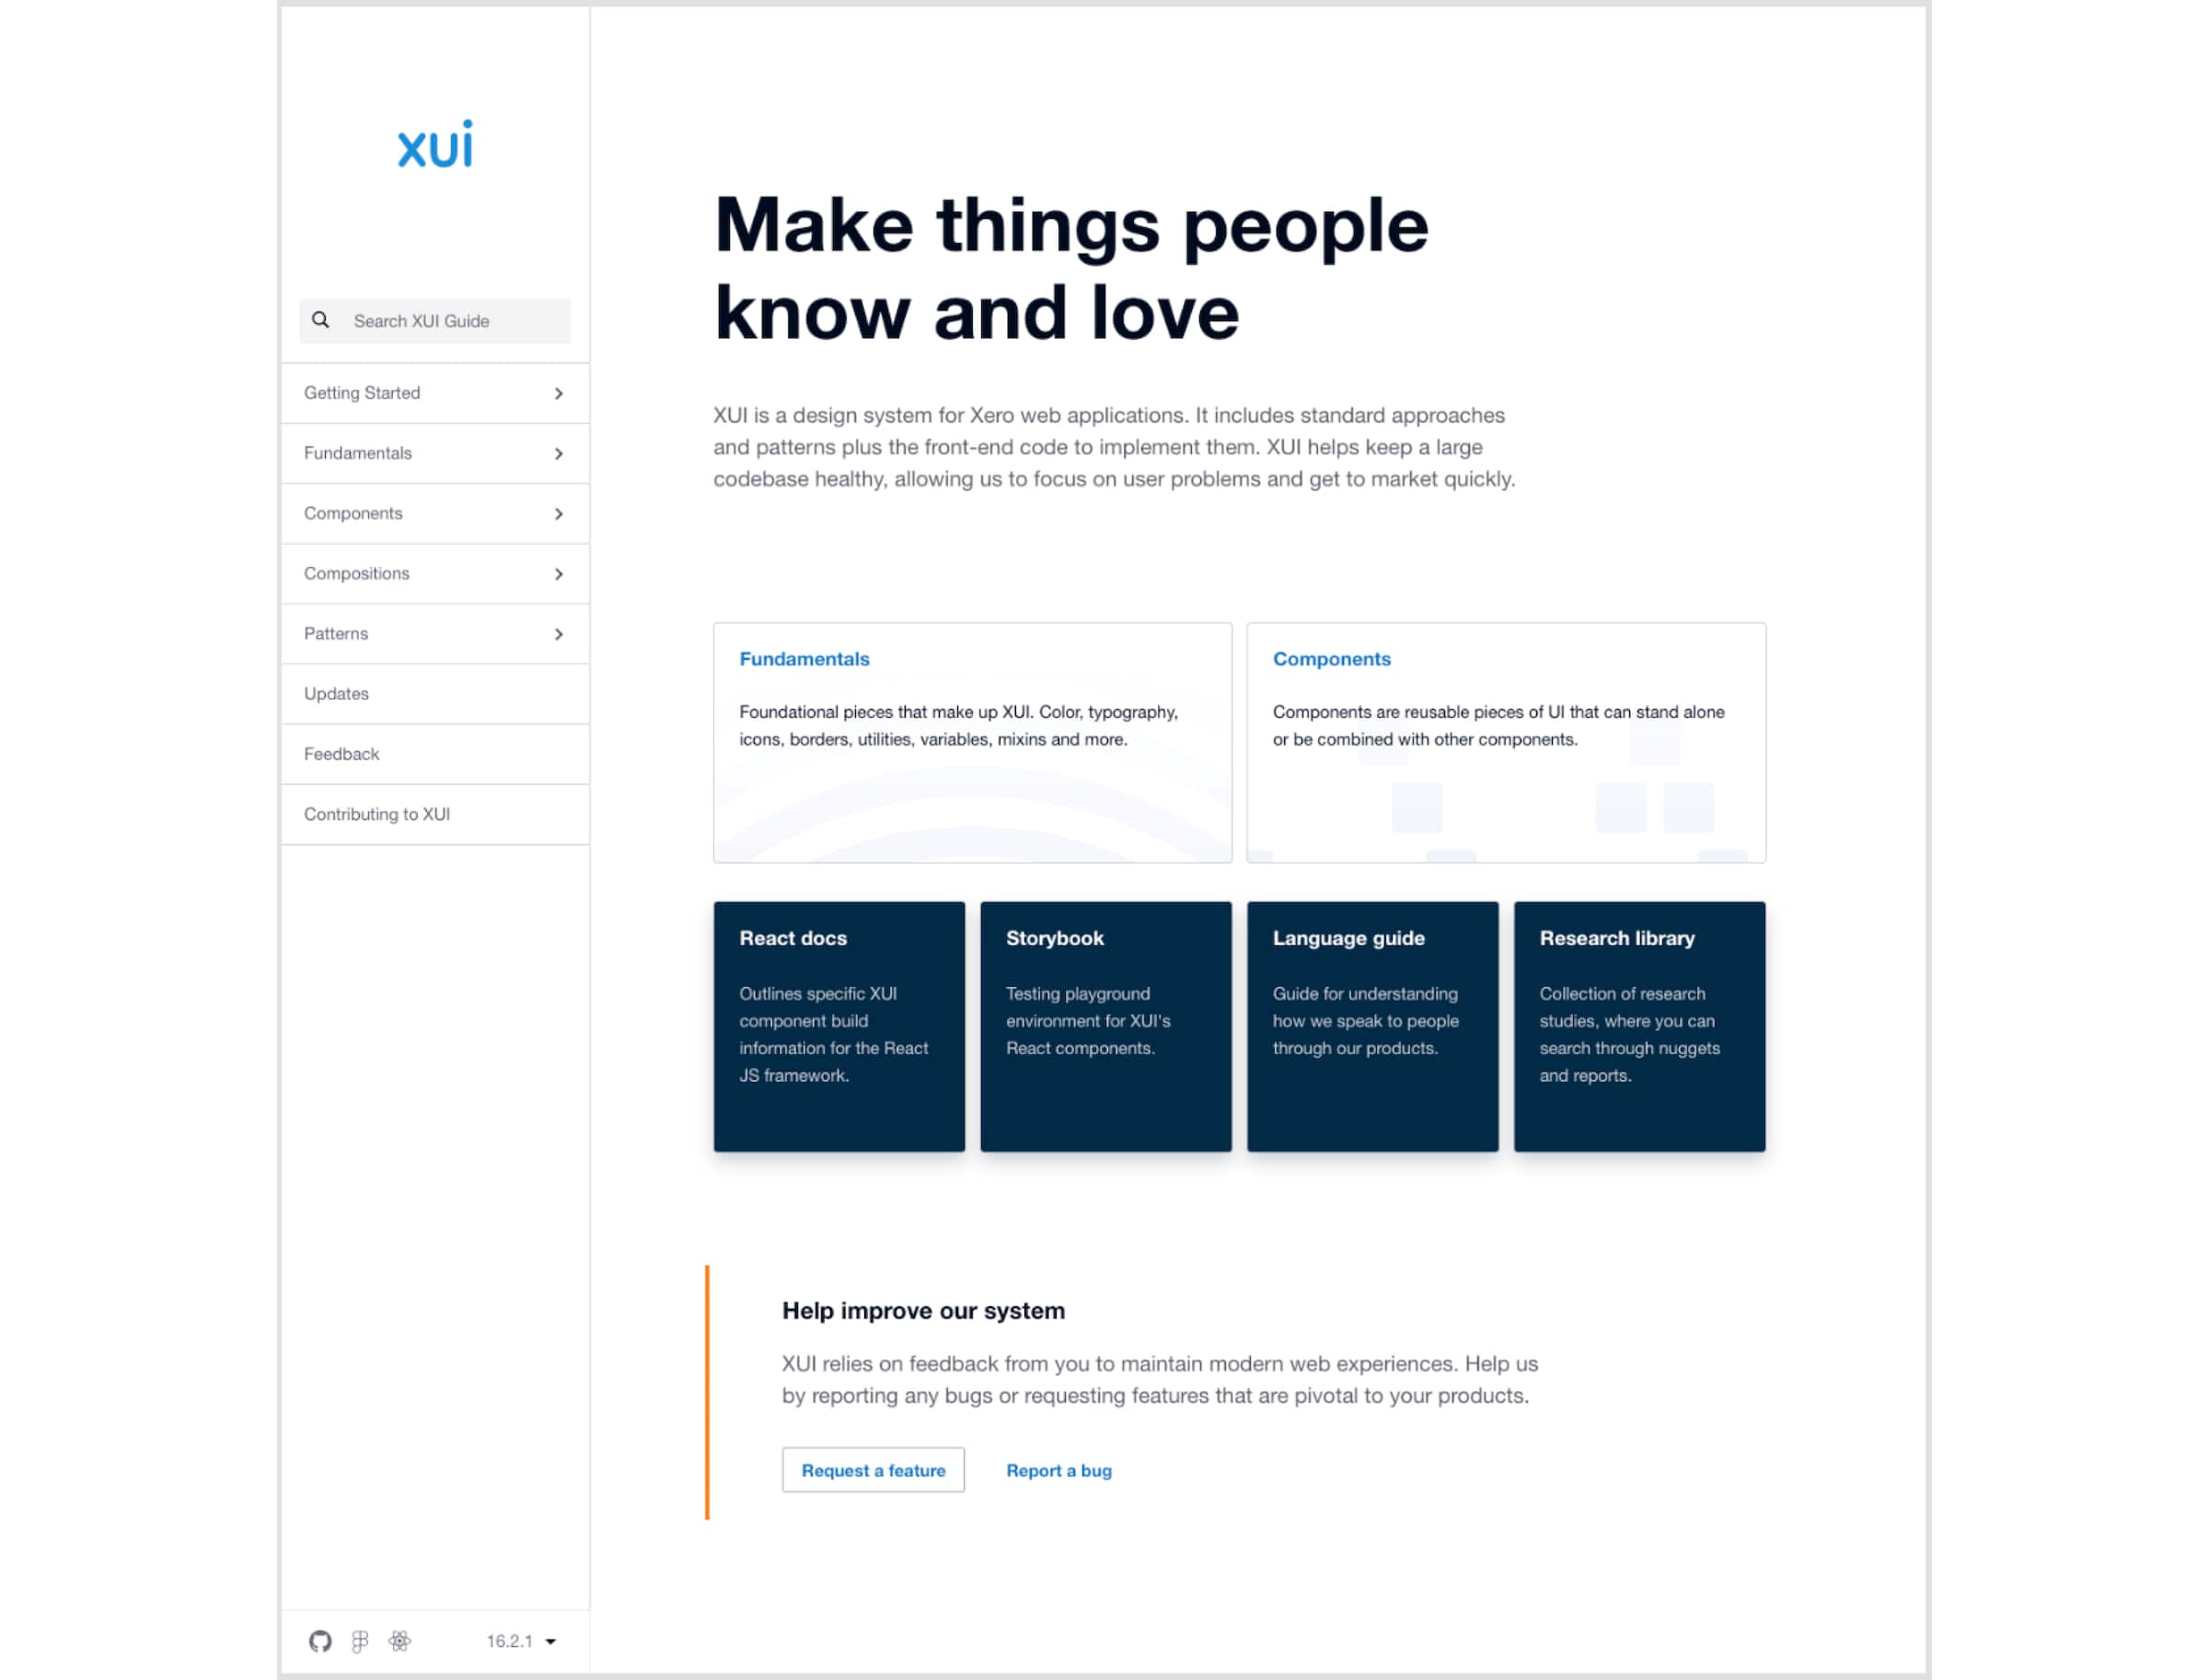 The home page of the Xero User Interface Guide, the documentation website for Xero’s internal design system.